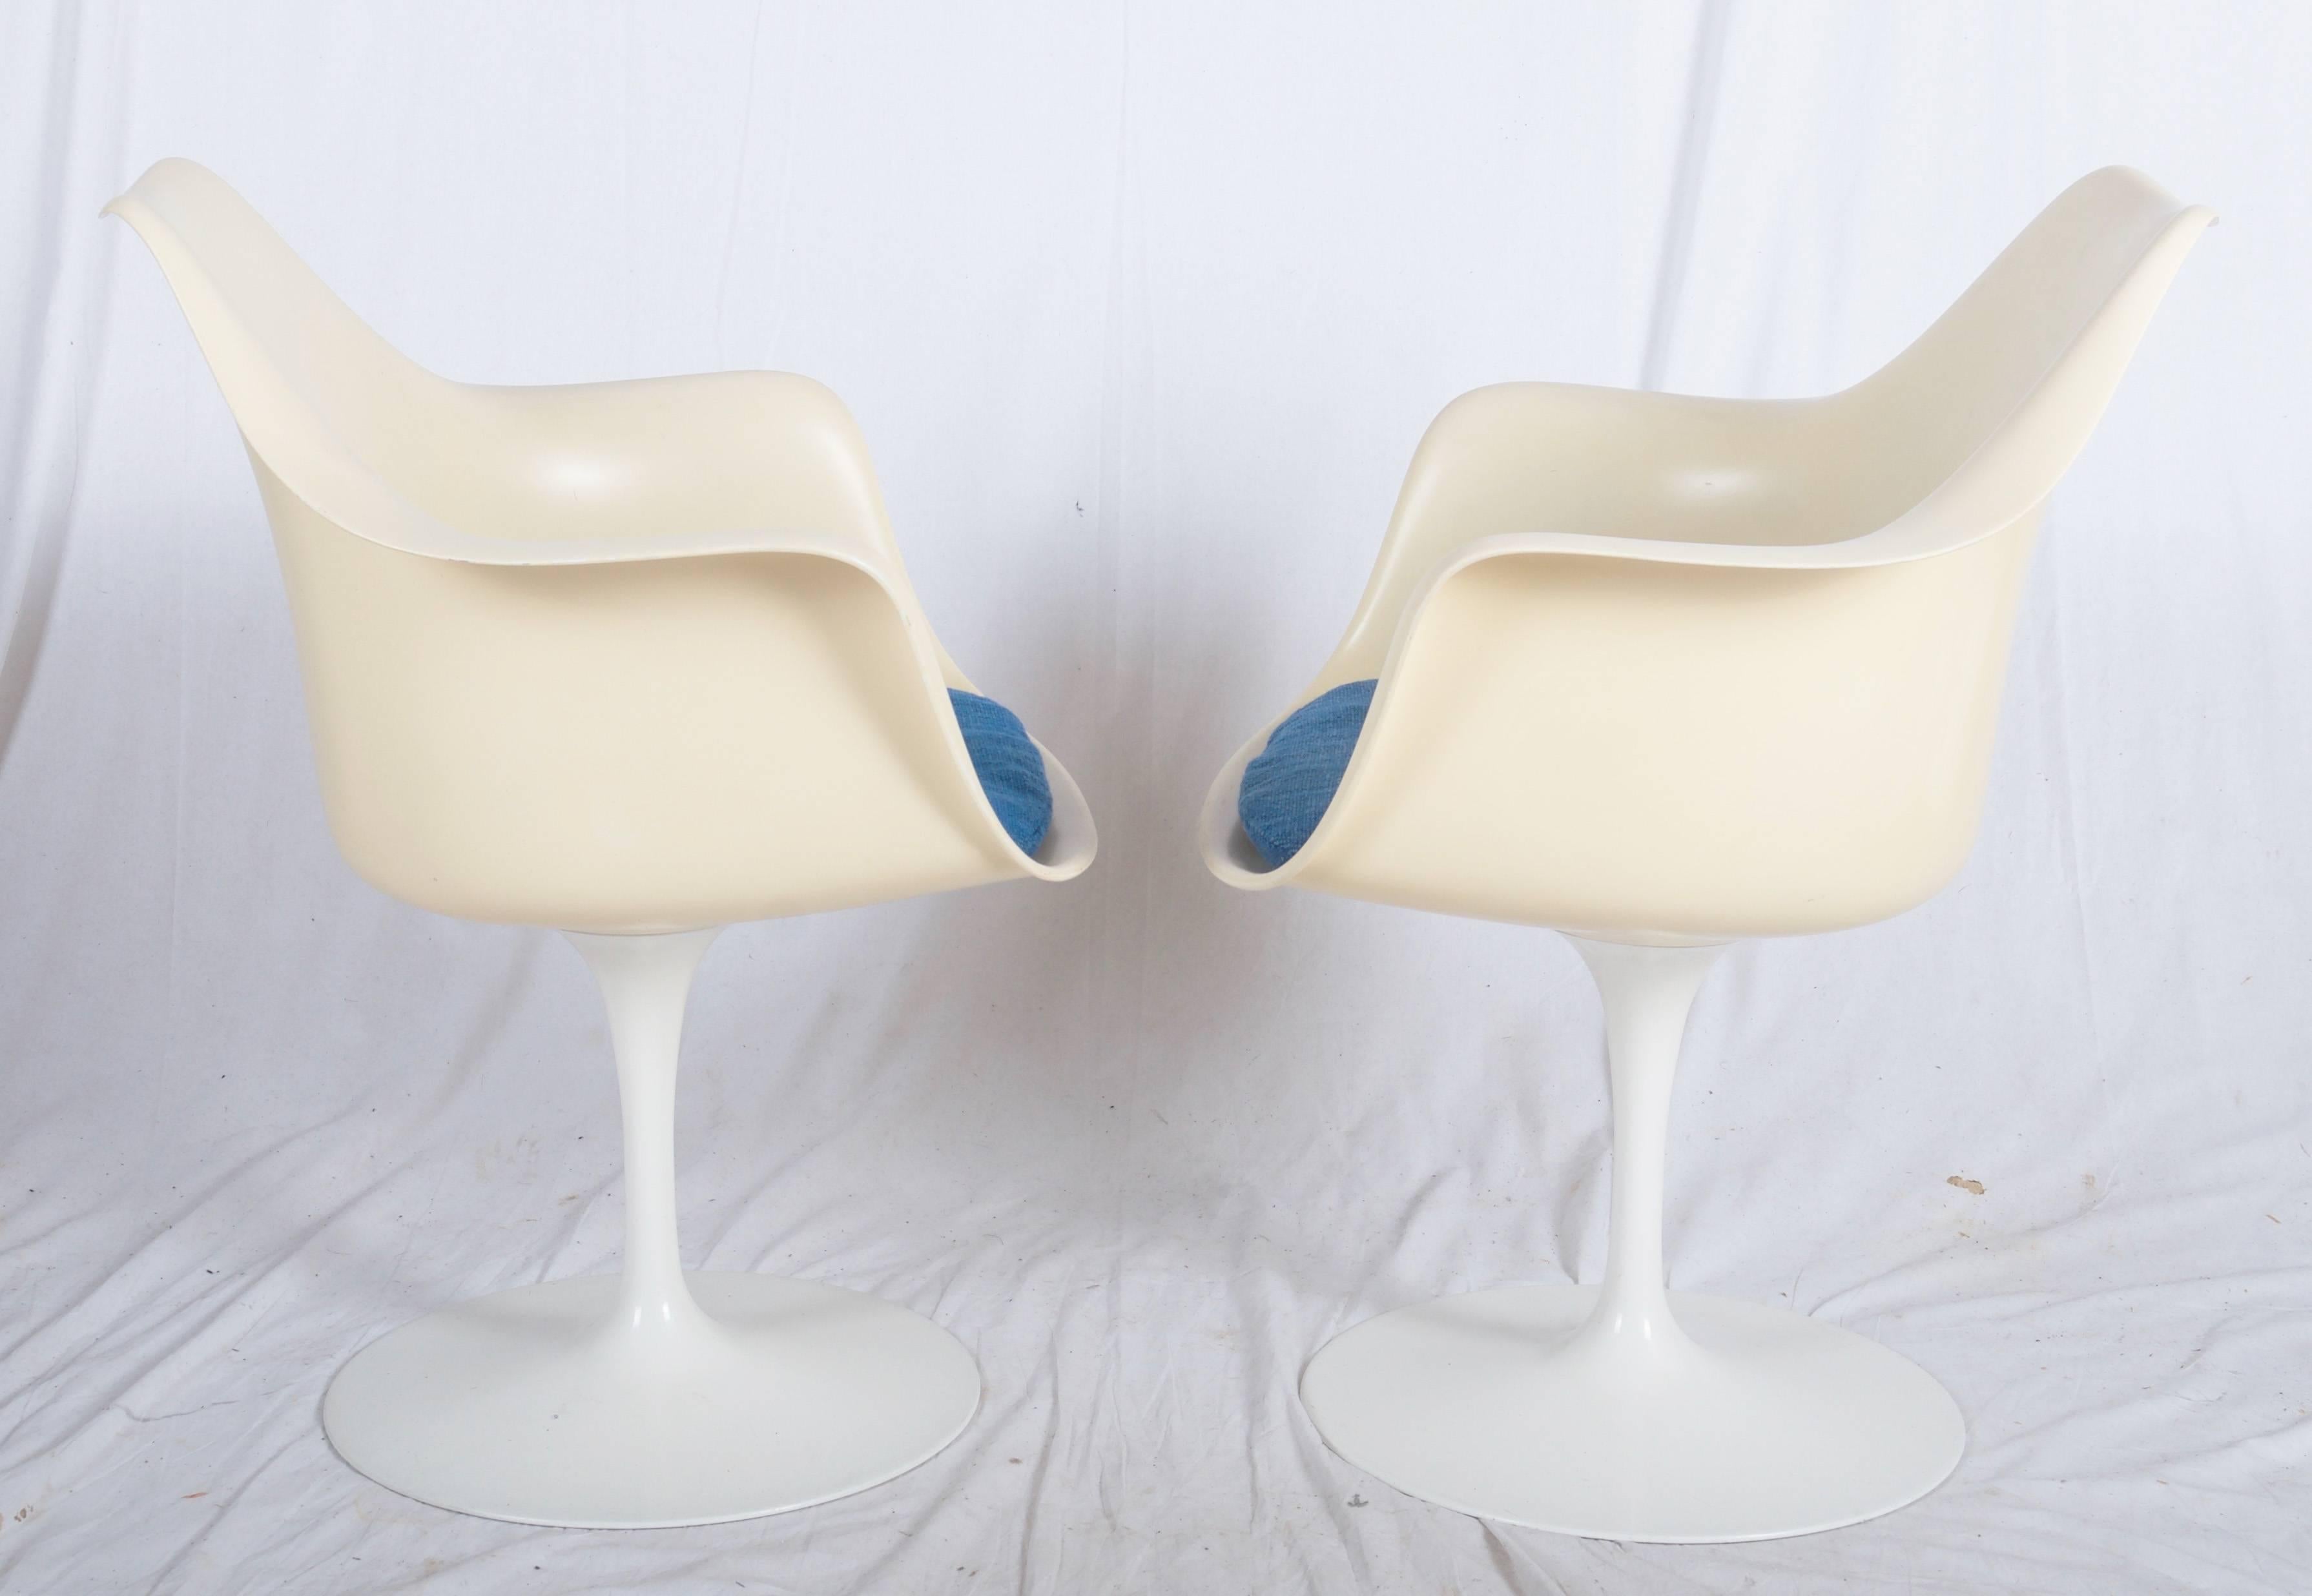 Pair of armchairs 'Tulip', model 151, design Eero Saarinen, 1955-1956. Early production, probably 1960s. White lacquered molded fiberglass and seat with wool cover. Produced by Knoll International.